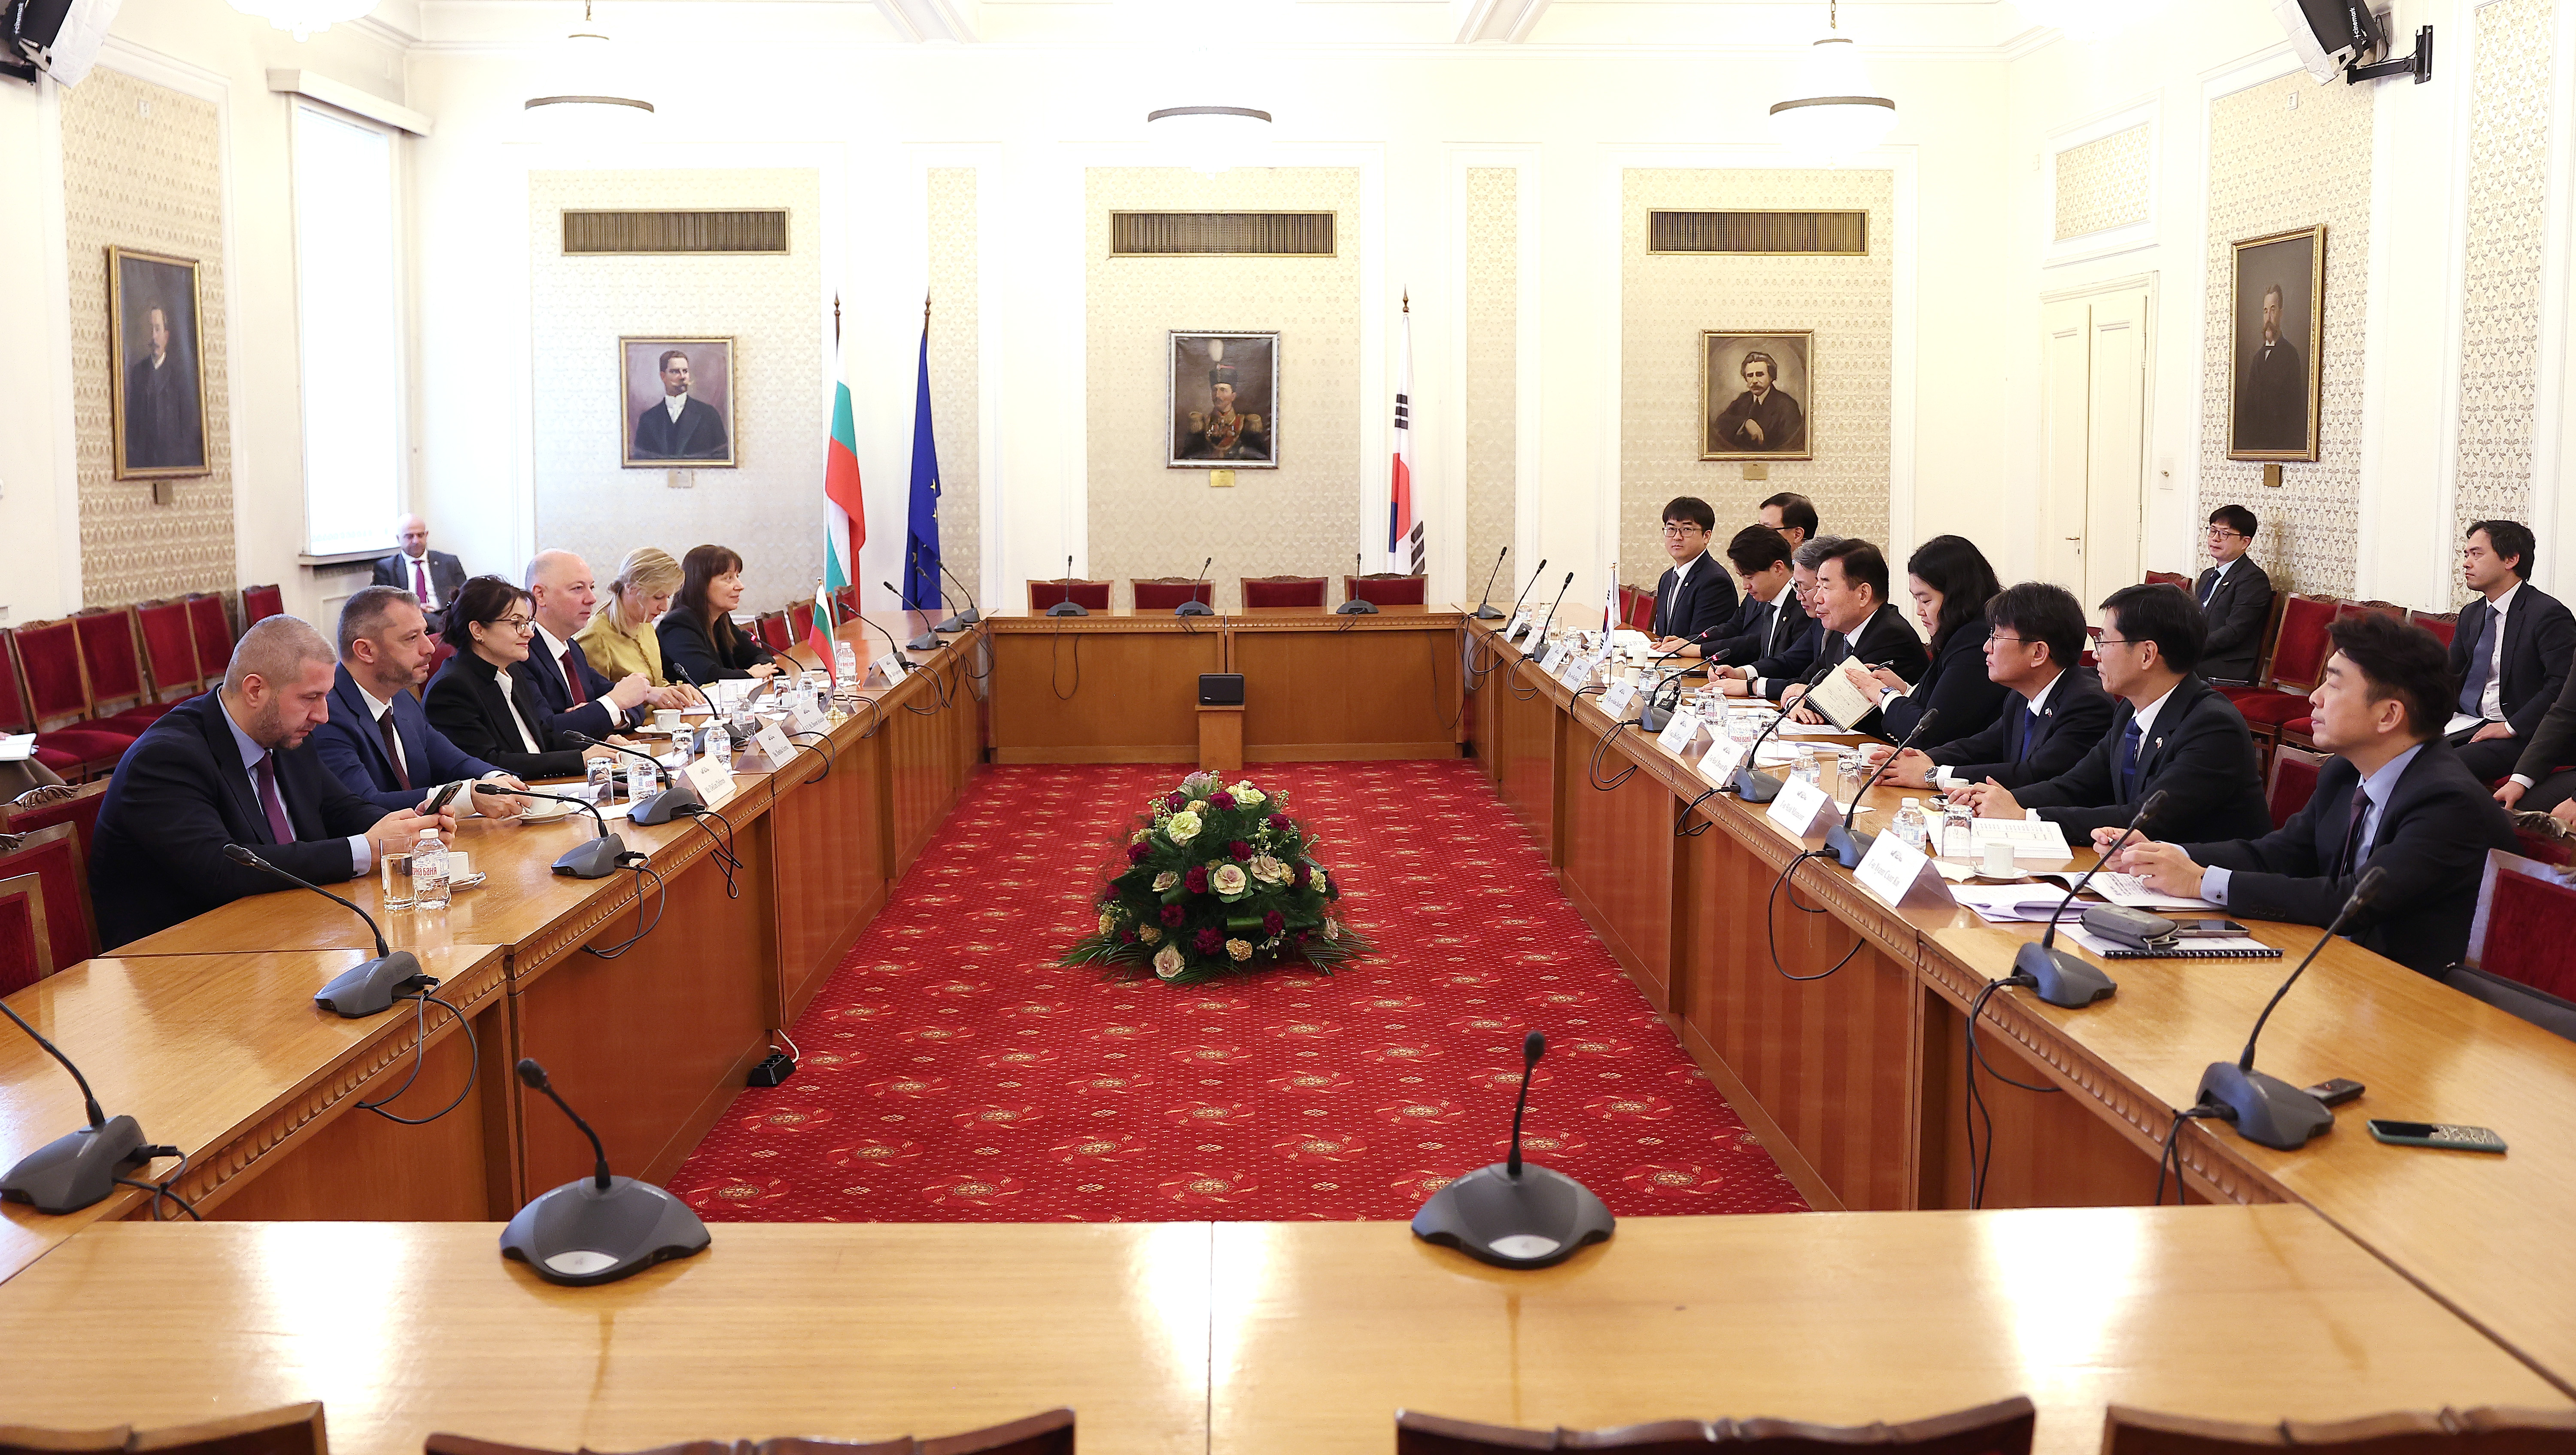 Speaker&rsquo;s economic and sales diplomacy helps Korea win Bulgarian nuclear power plant project 관련사진 7 보기